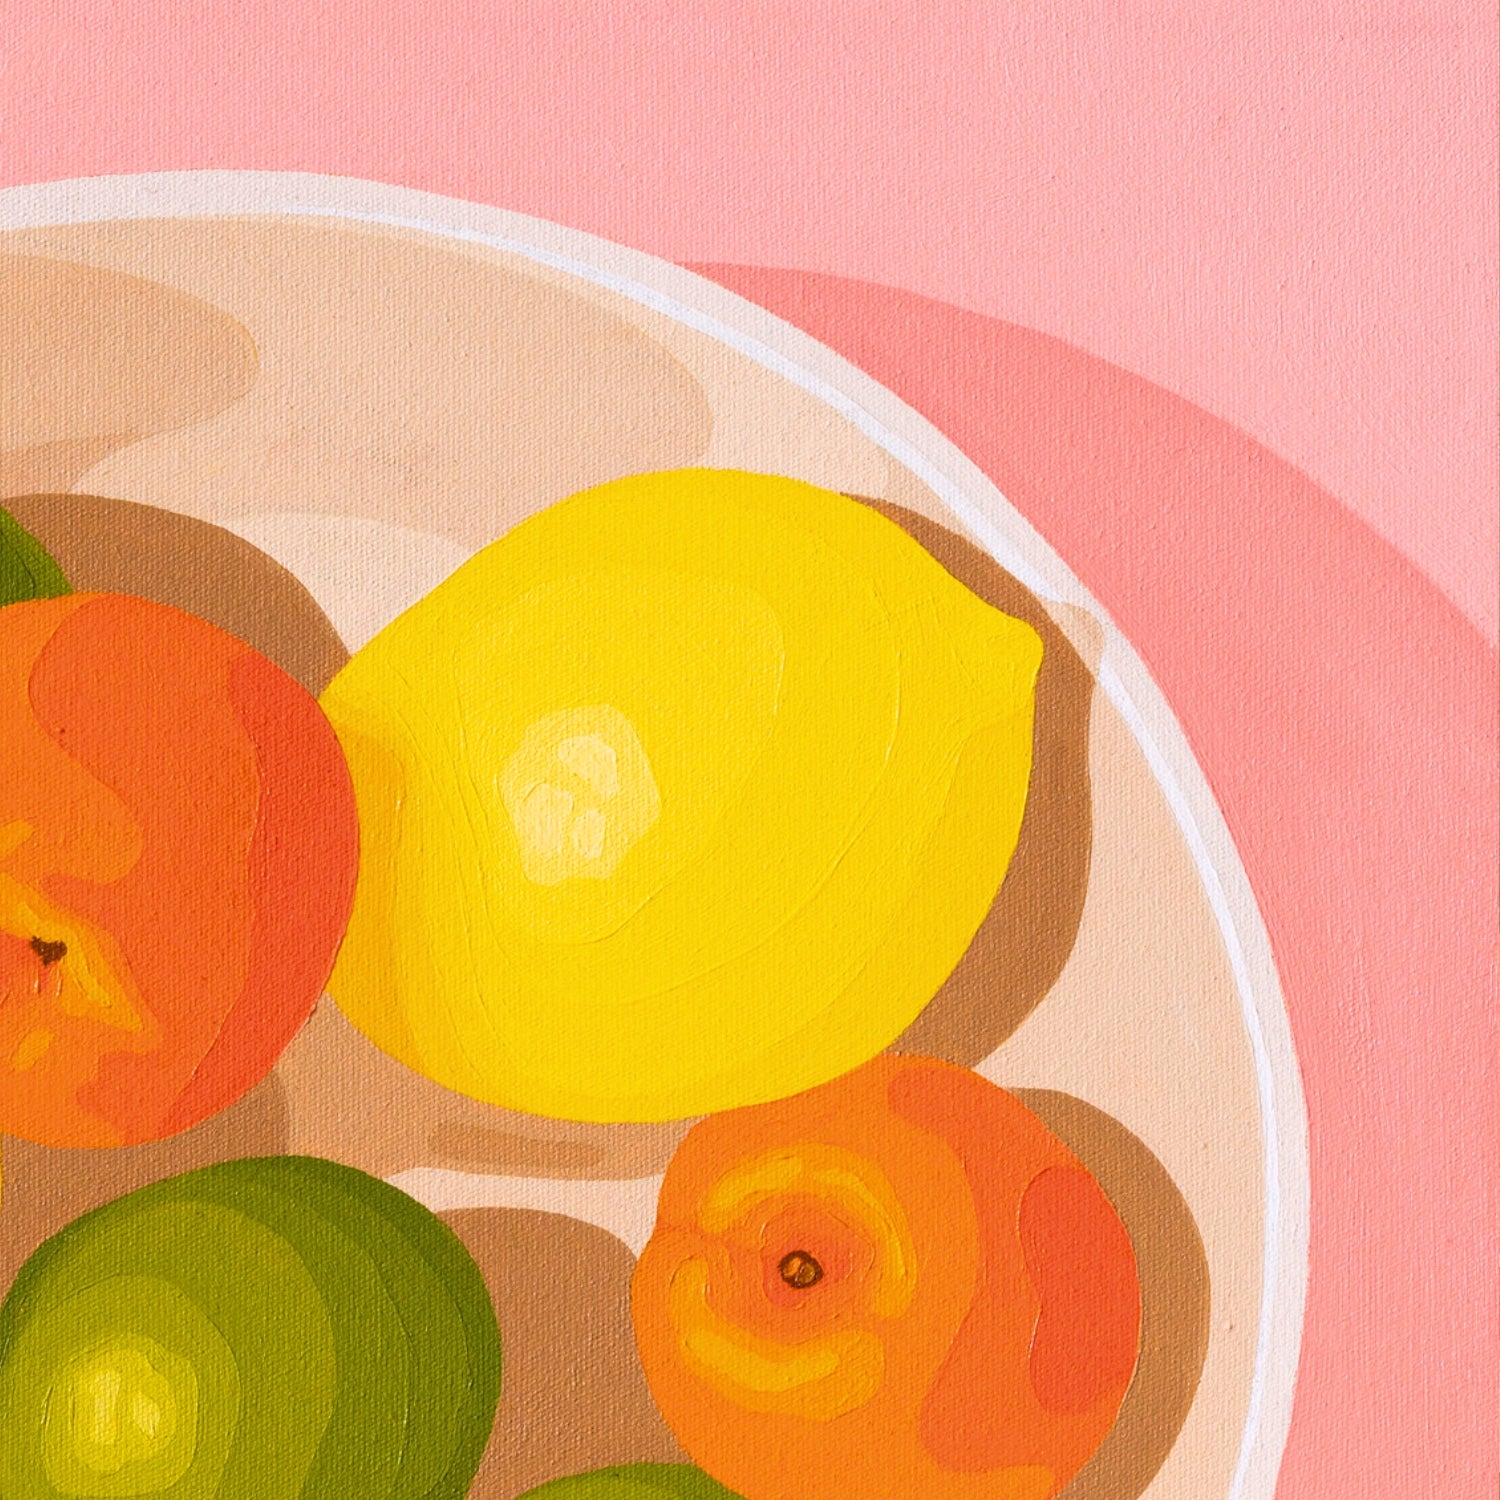 contemporary modern original oil painting of colourful lemons, mandarines and lime fruits in a bowl on a soft pink background